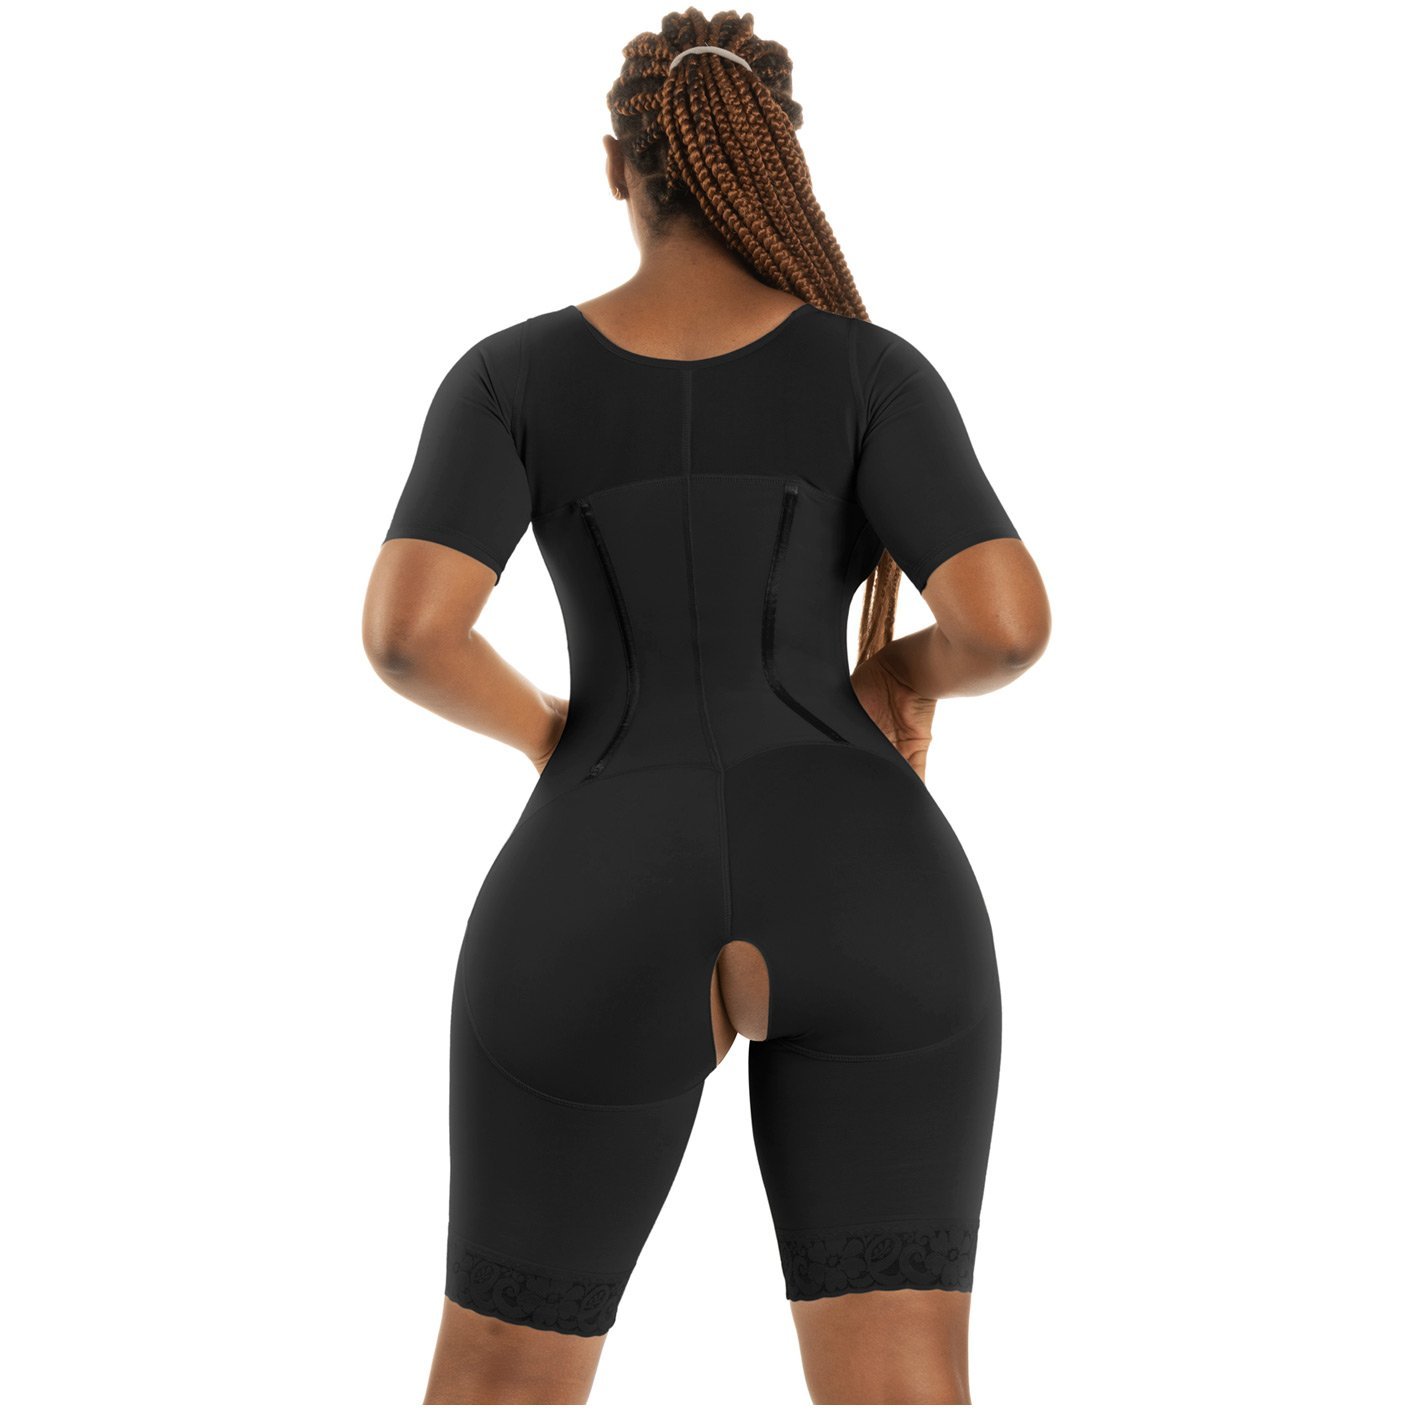 Bling Shapers 938BF  Colombian Compression Garment for Women